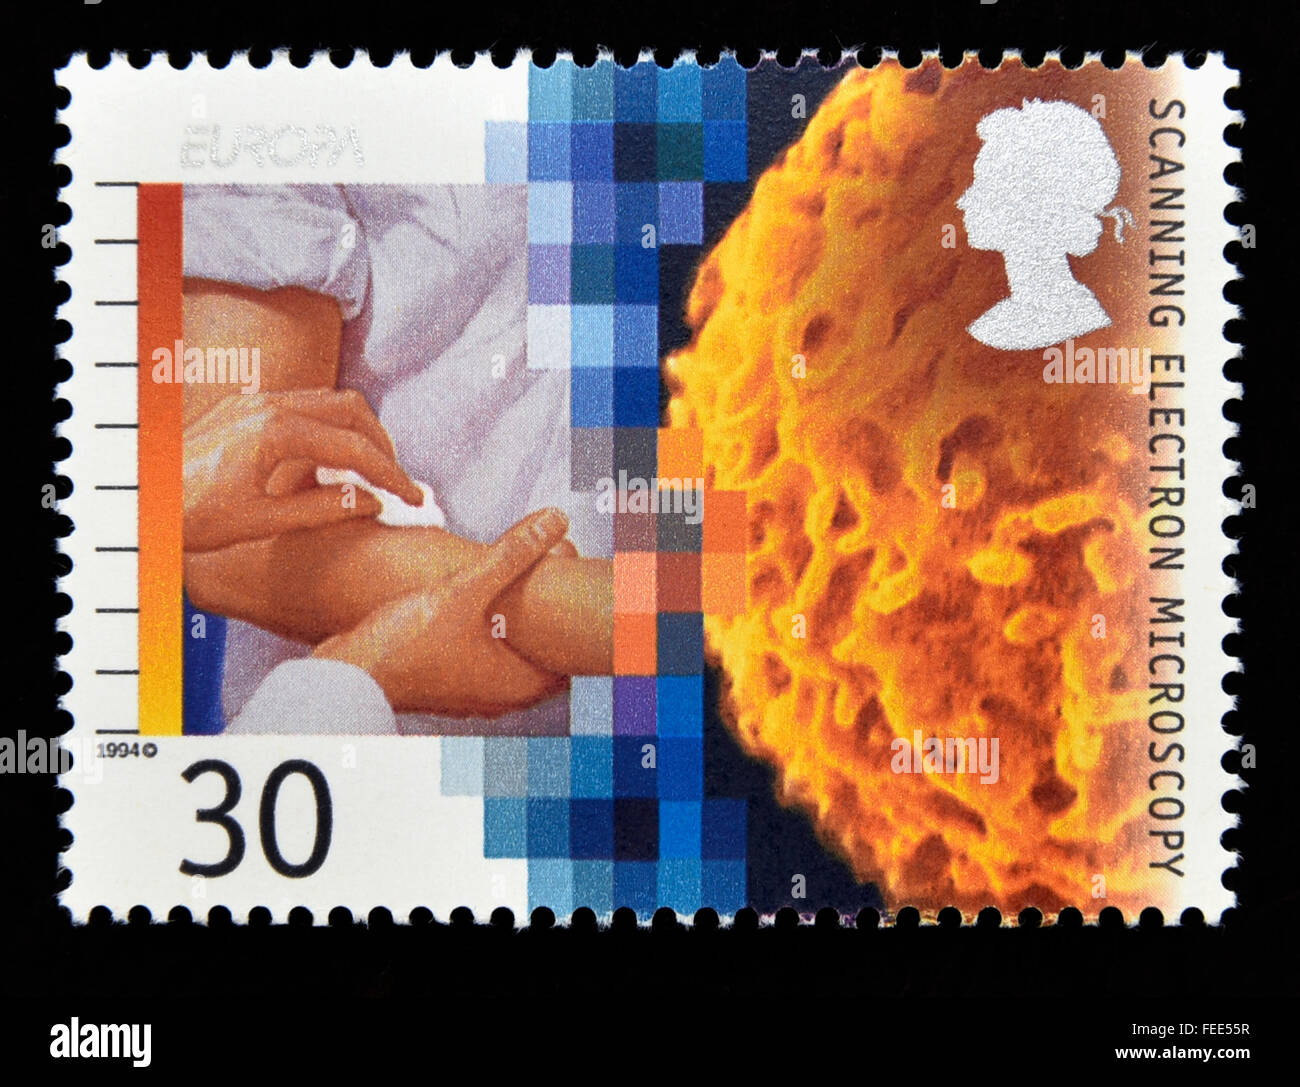 Postage stamp. Great Britain. Queen Elizabeth II. 1994. Europa. Medical Discoveries. Scanning Electron Microscopy. 30p. Stock Photo